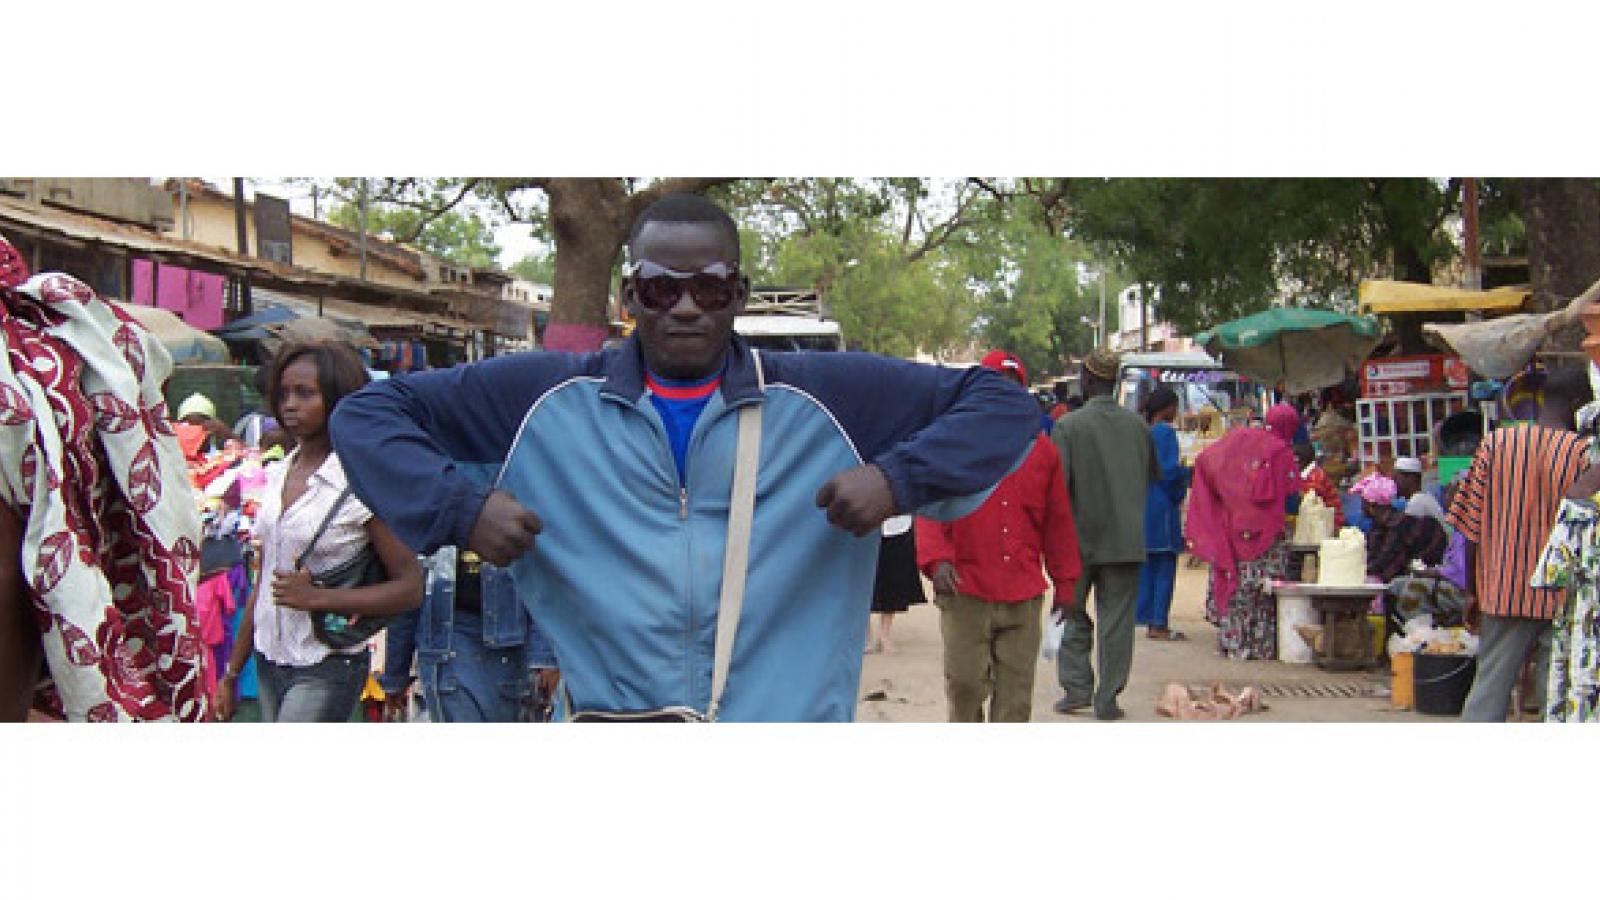 Man in blue shirt in the middle of an African market.